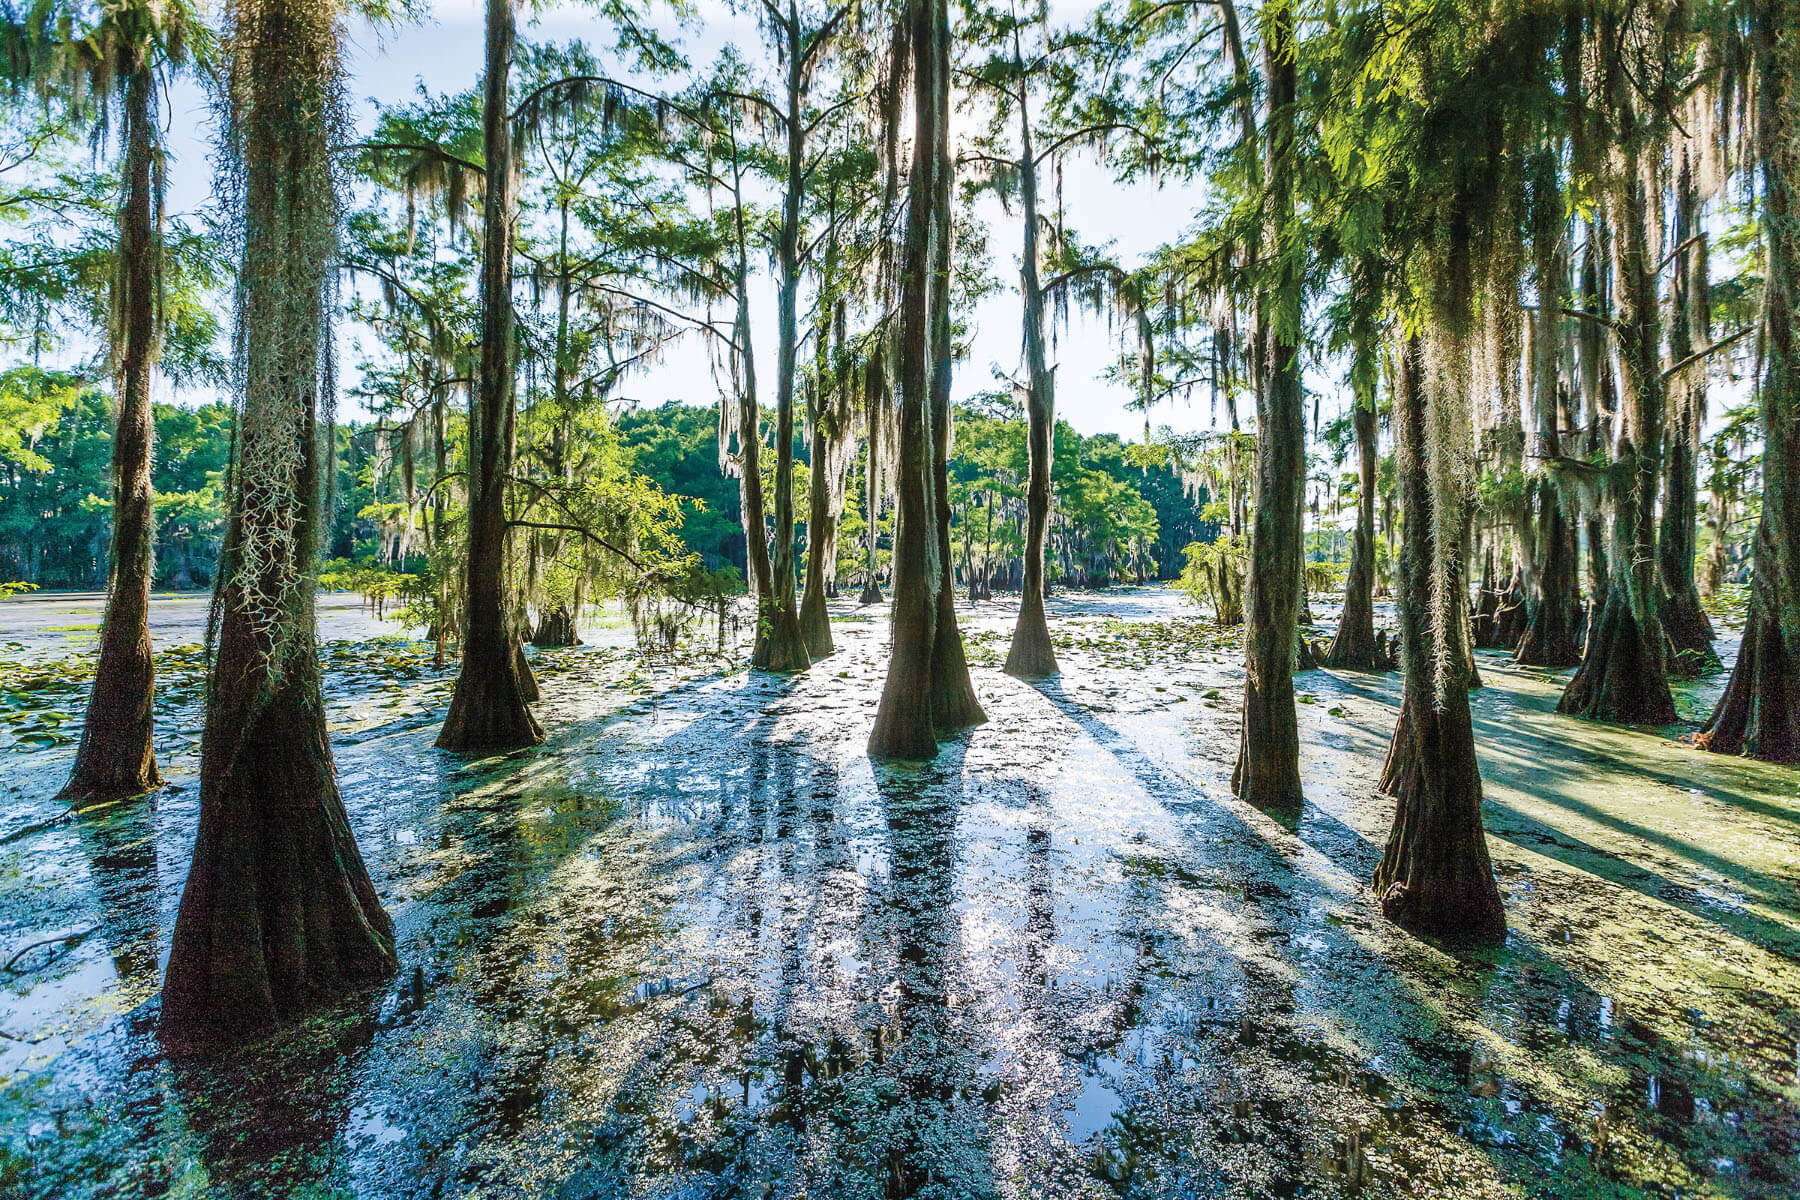 Tall trees grow out of swampy waters under a clear sky with sun peeking through greenery